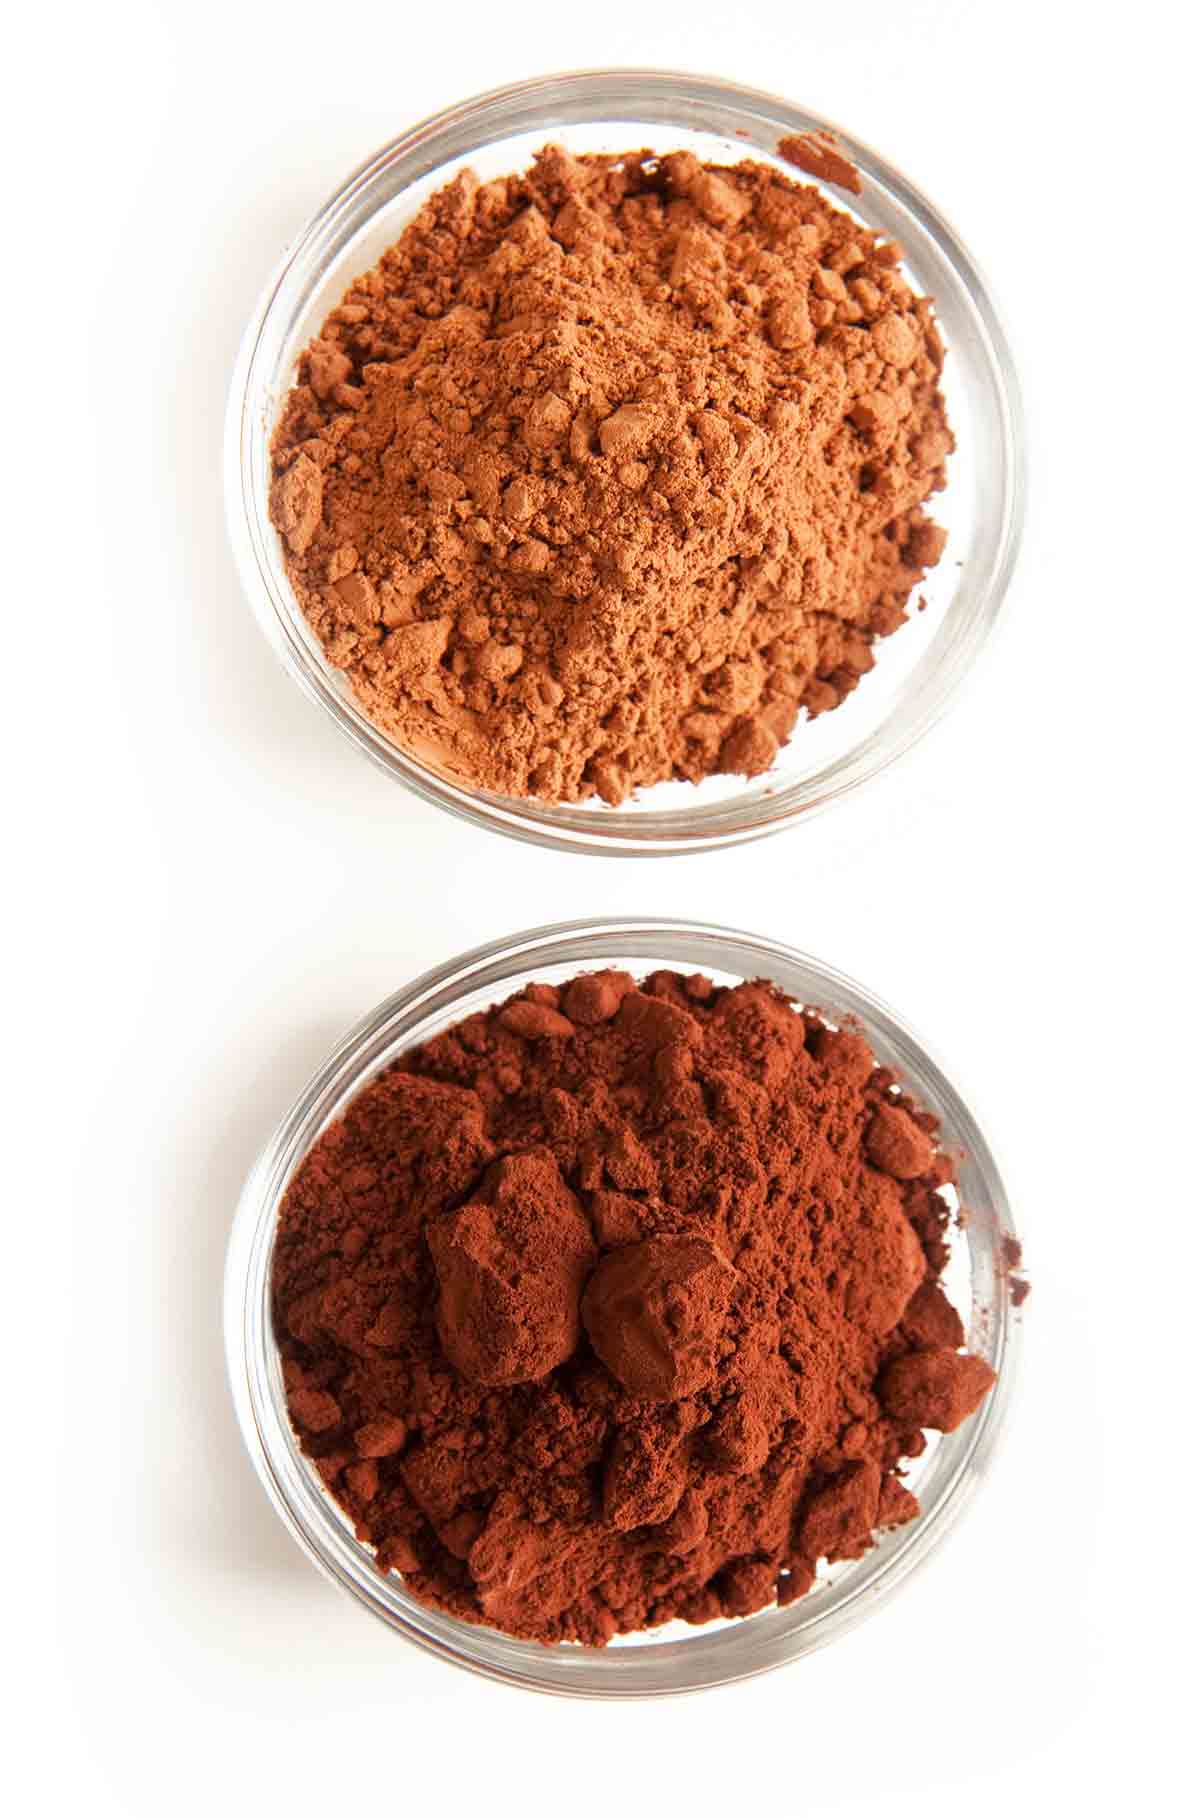 Two bowls of cocoa powders for the writing, what's the difference between cocoa powders?